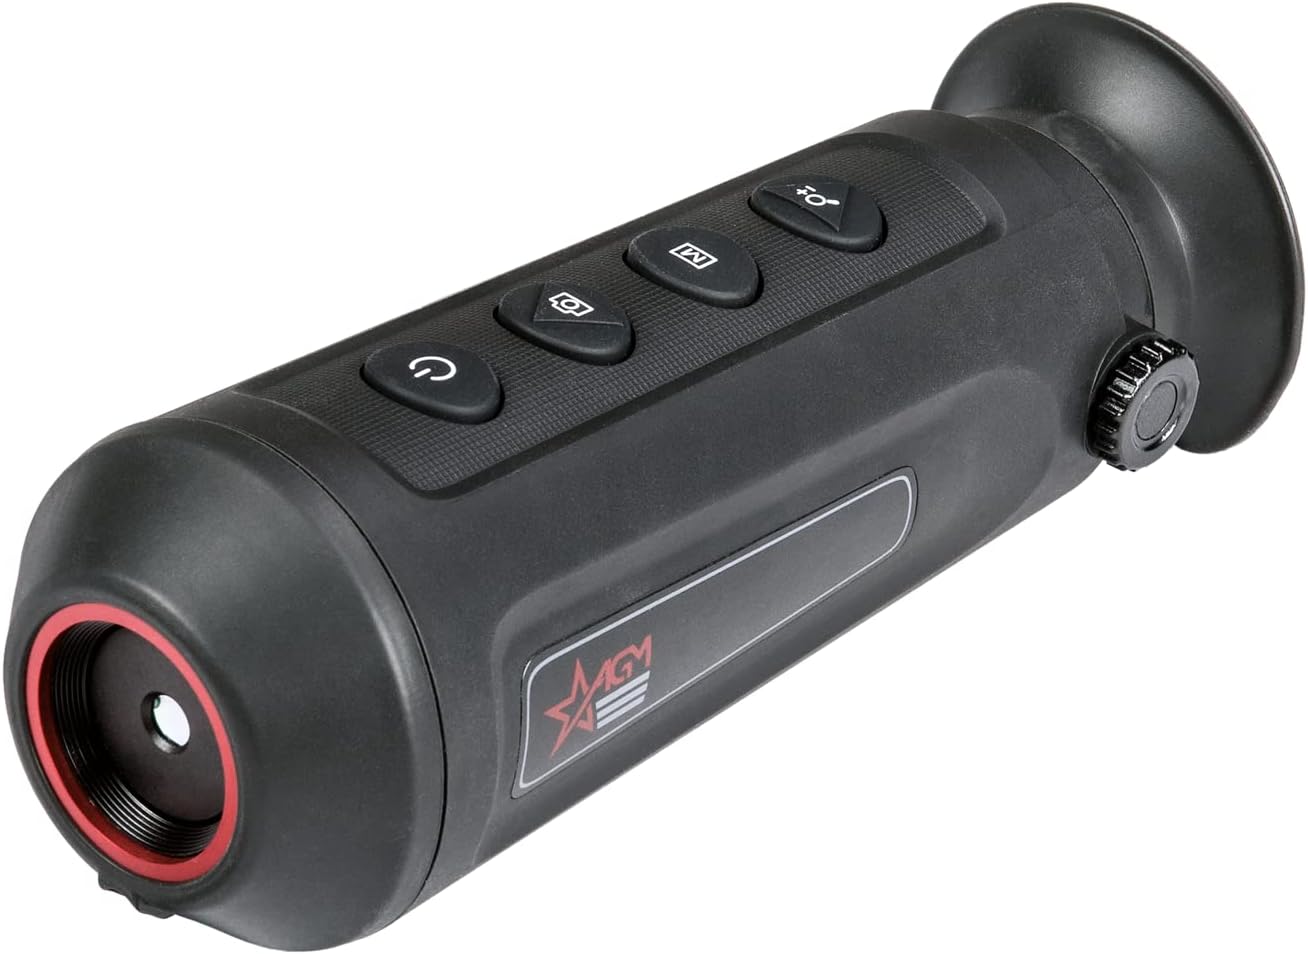 AGM Global Vision Asp-Micro TM160 Short Range Thermal Imaging Monocular with Heat Vision for Hunting, High-Sensitivity Infrared with Distance Measurement and Wi-Fi Hotspot 6.3 × 2.4 × 2.2